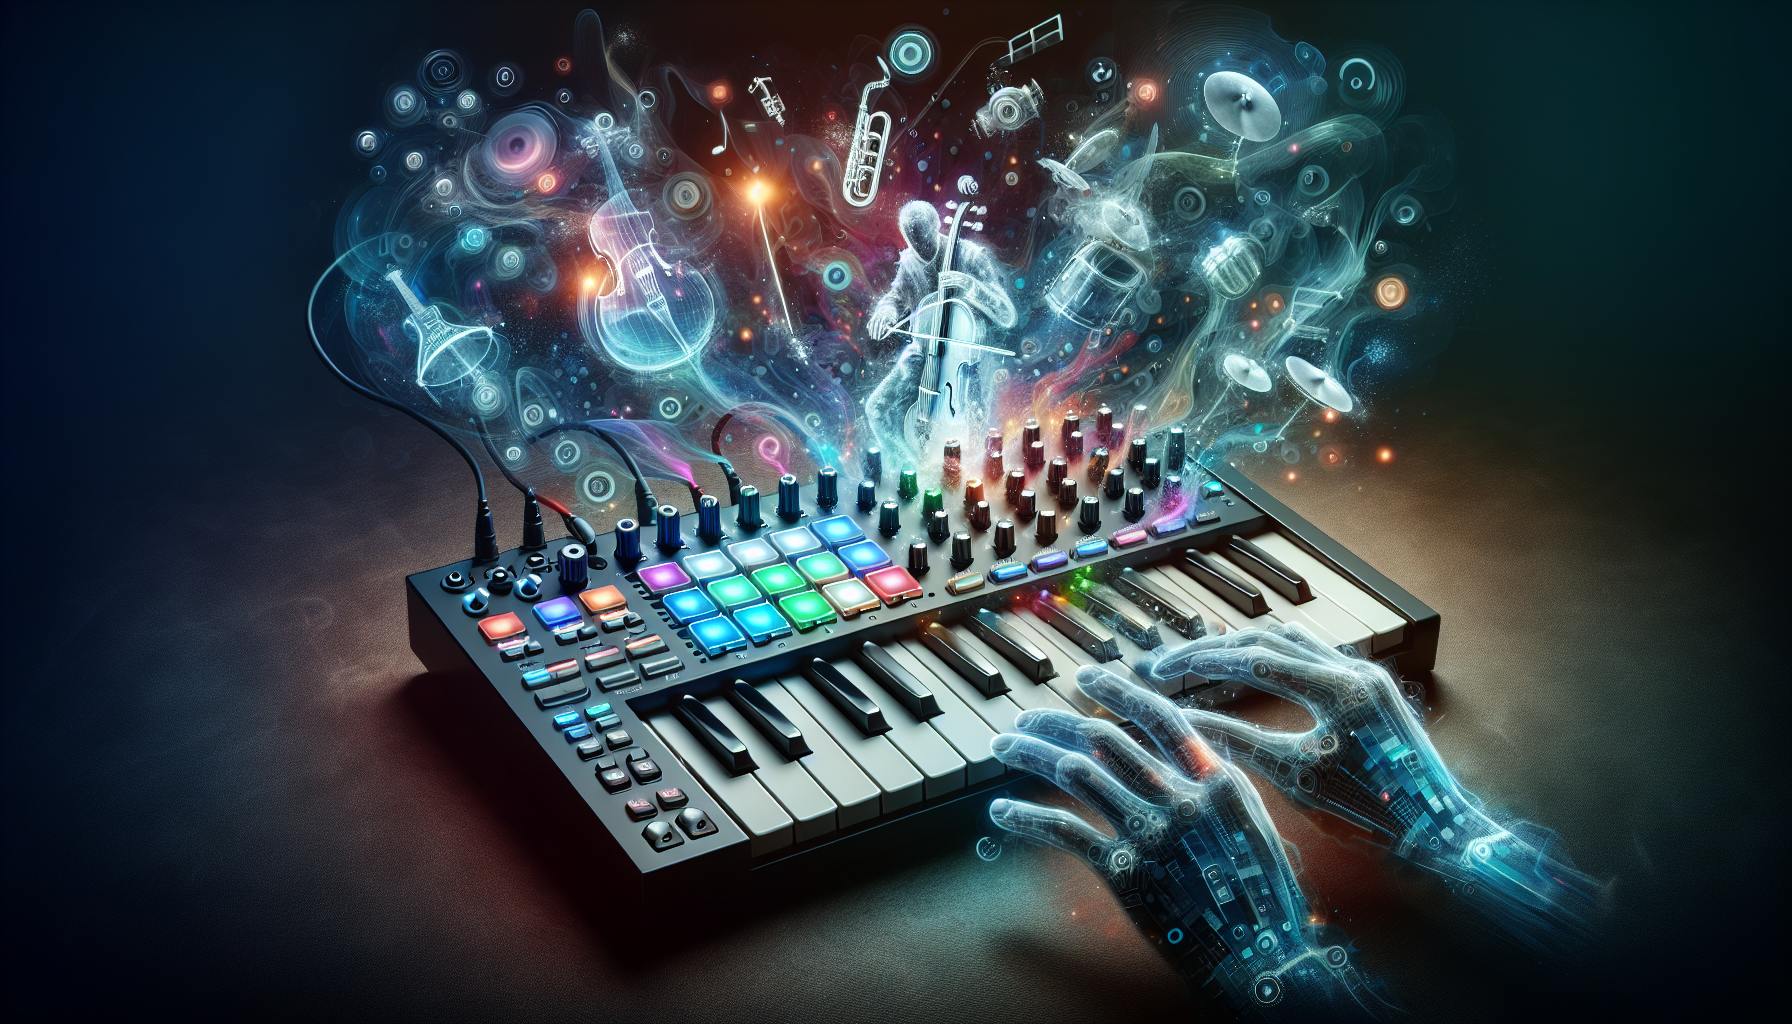 Illustration of MIDI controller and keyboard for music production